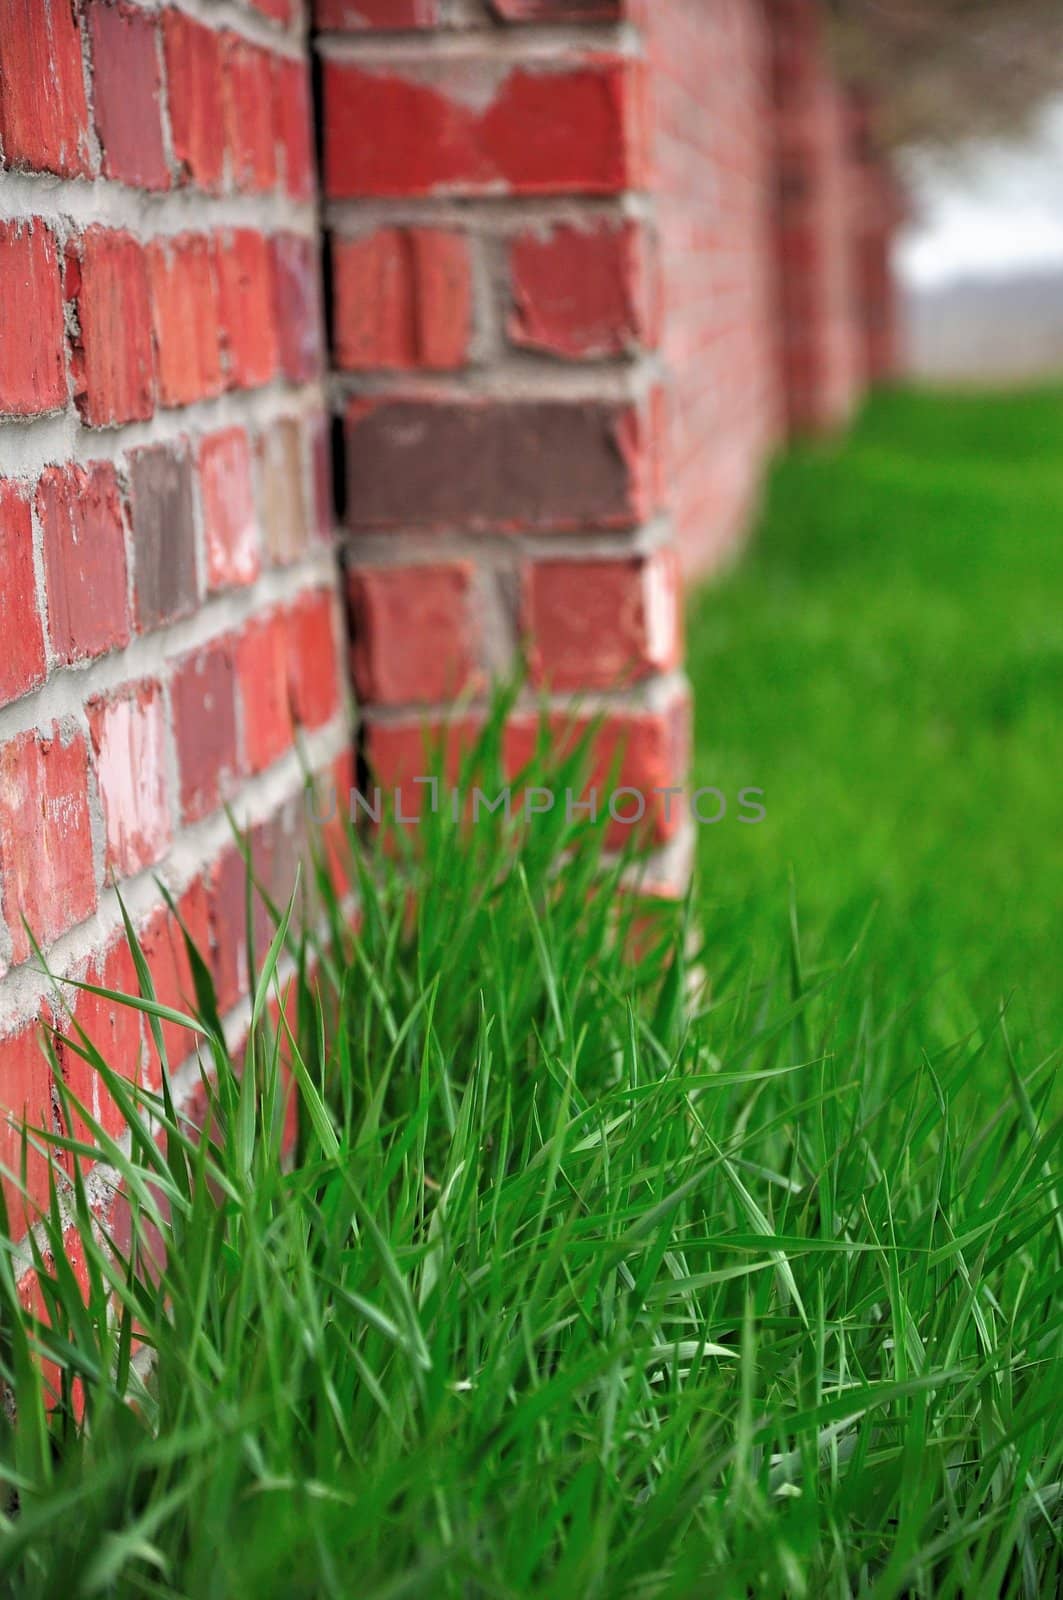 A red brick wall stands out in a field of green grass.